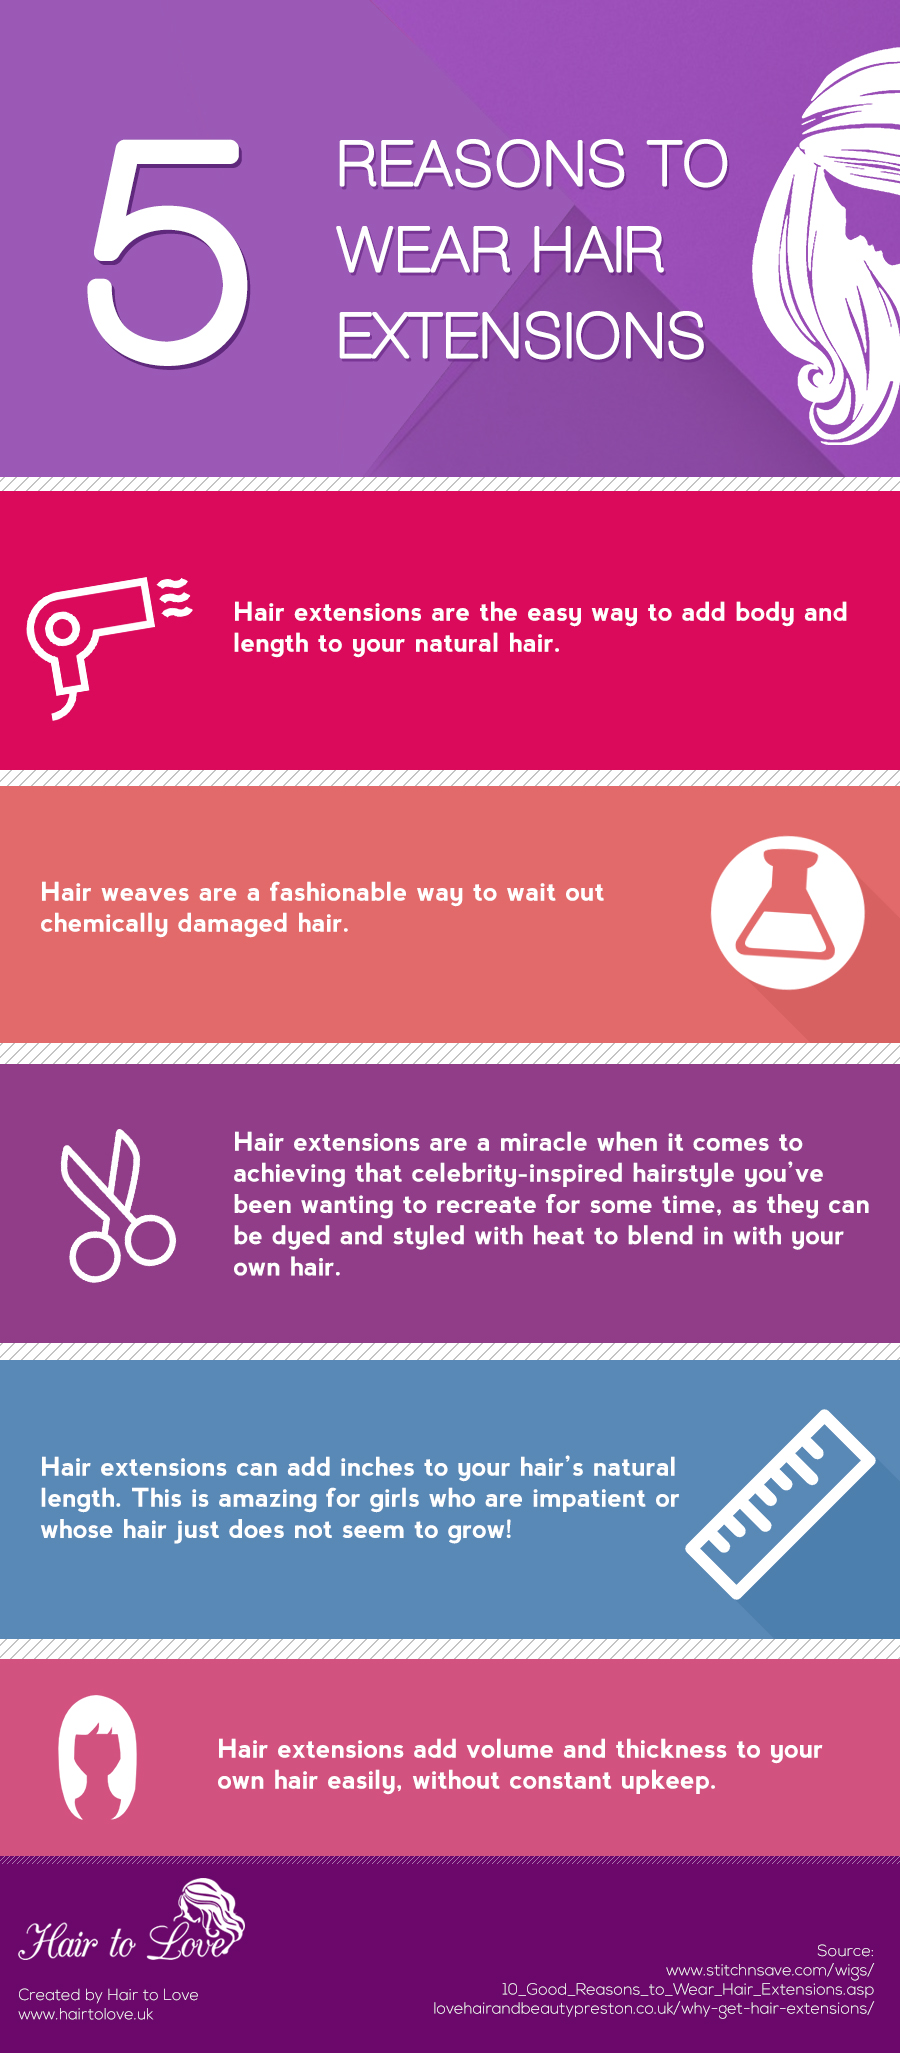 5 Top Reasons Why You Should Wear Hair Extensions